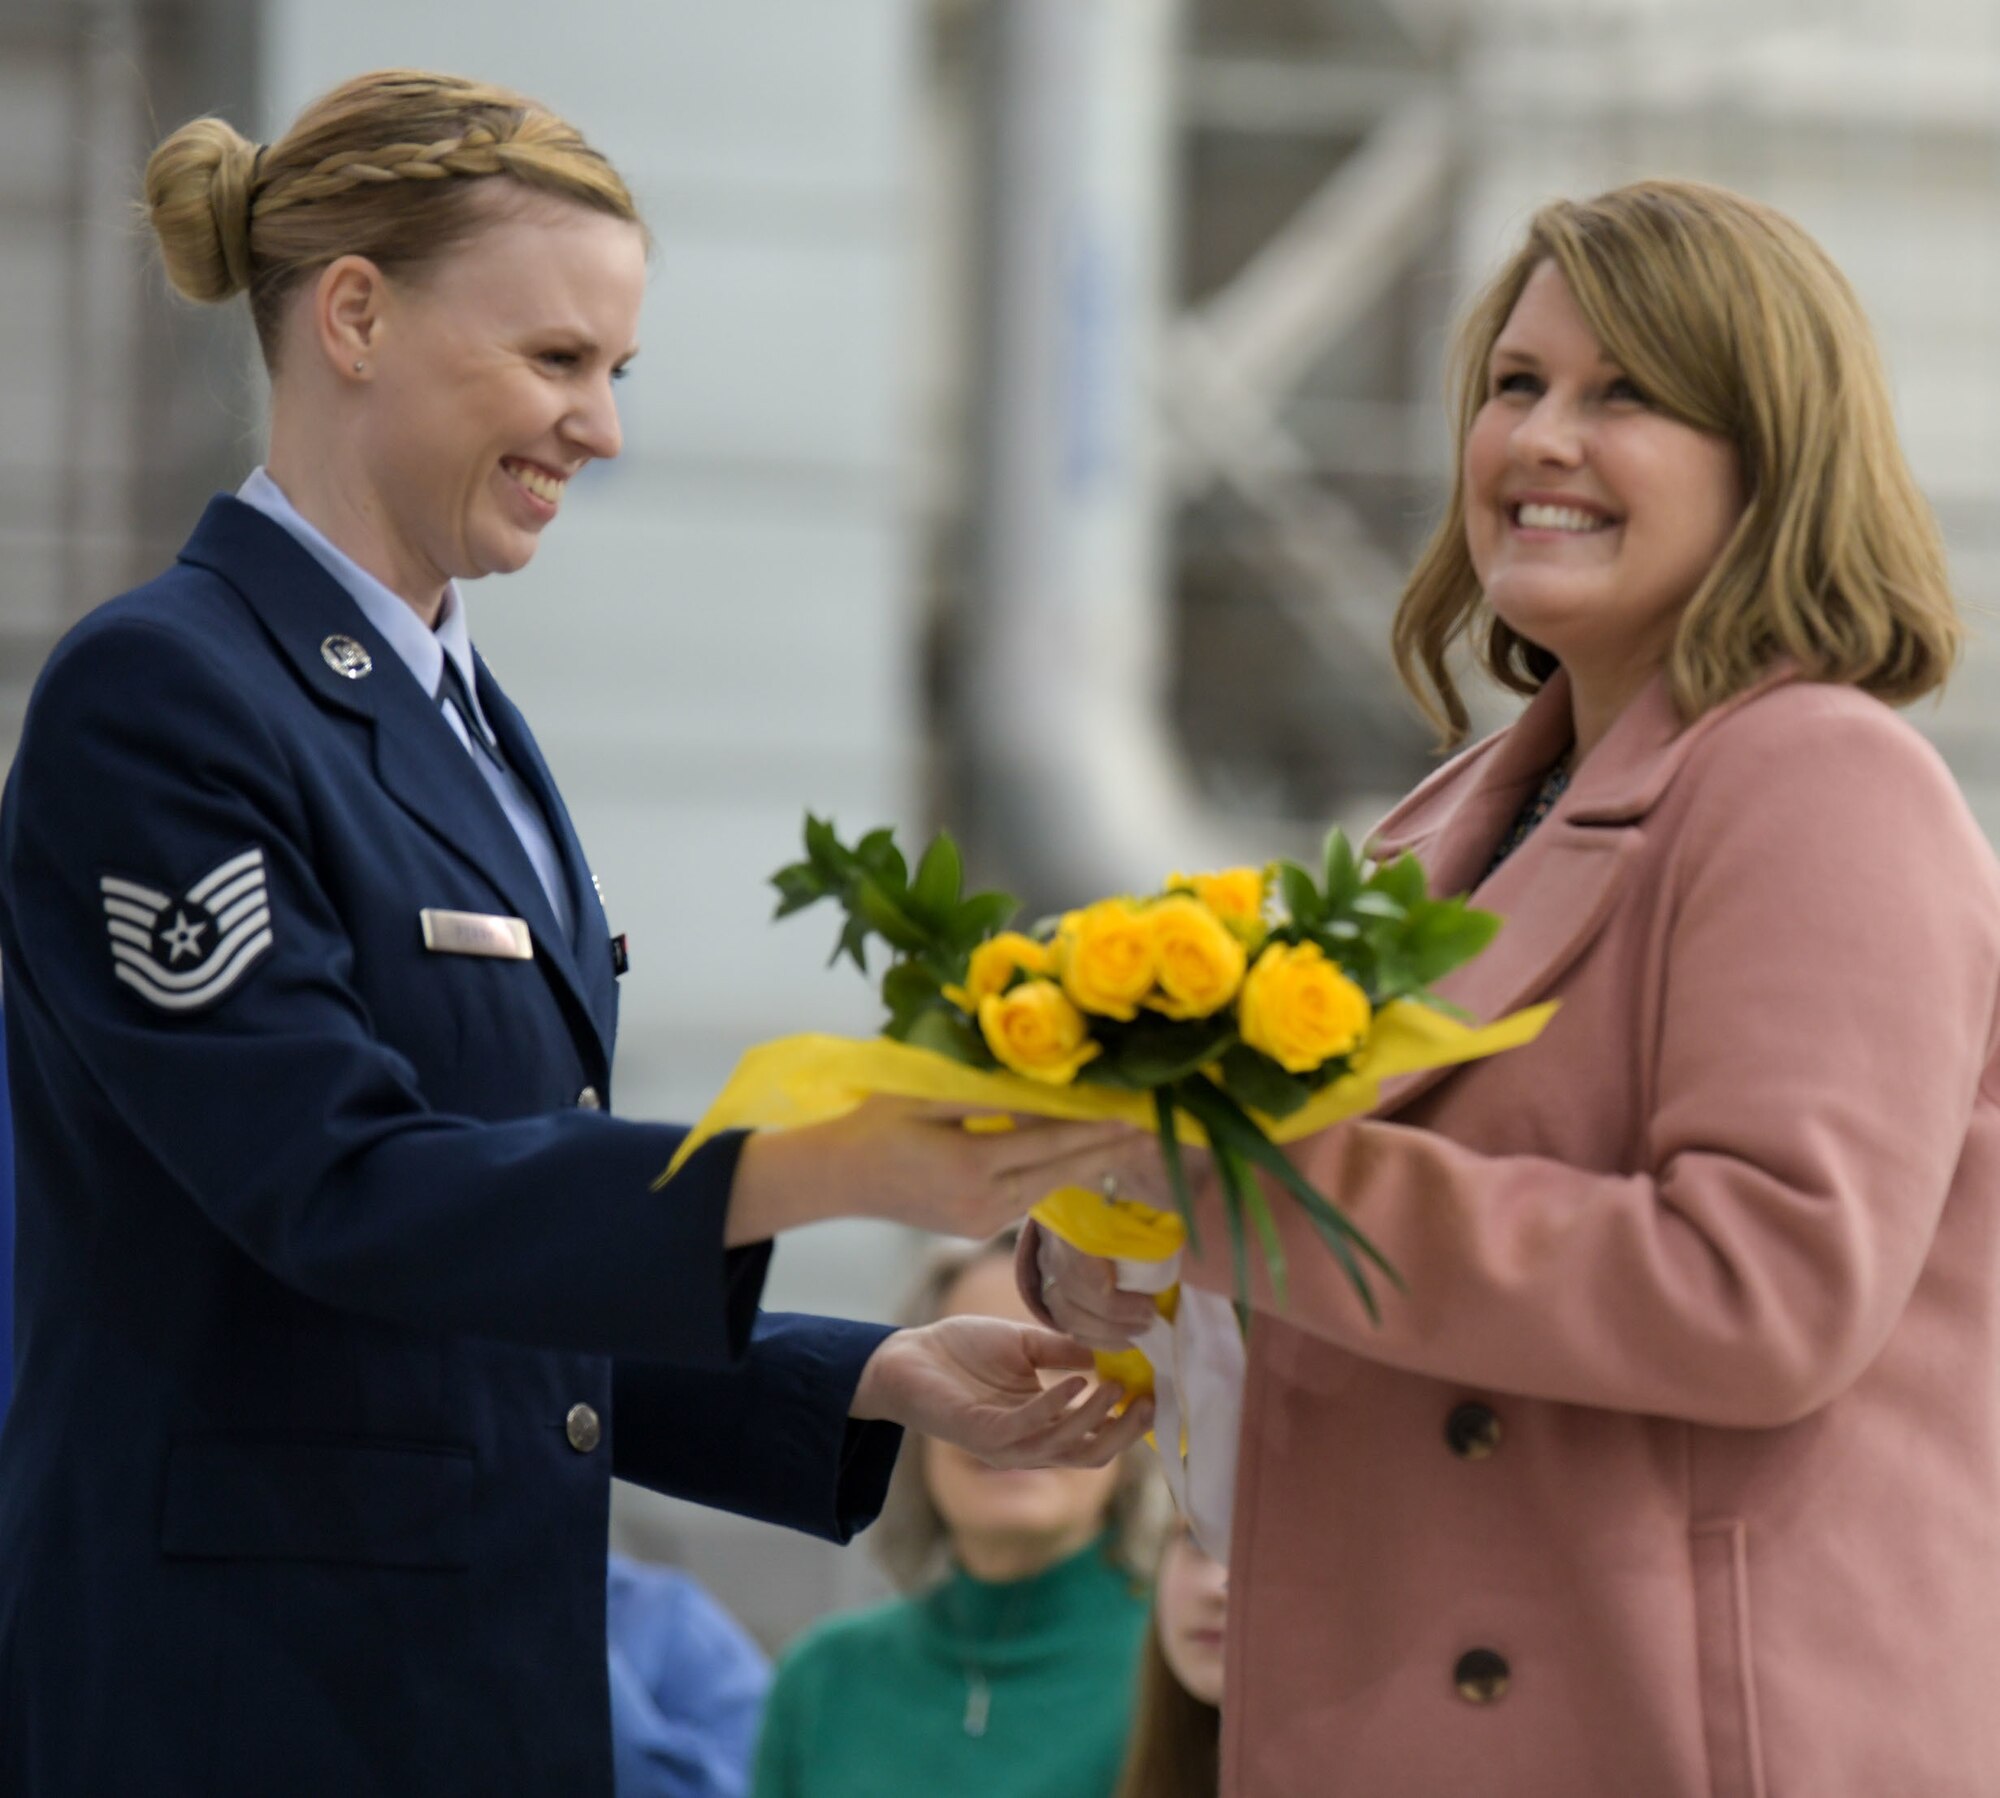 Kelli Watson, wife of incoming commander, Col. Britt A. Watson, receives a bouquet of yellow roses at the 172nd Airlift Wing change of command ceremony Feb. 6, 2022.